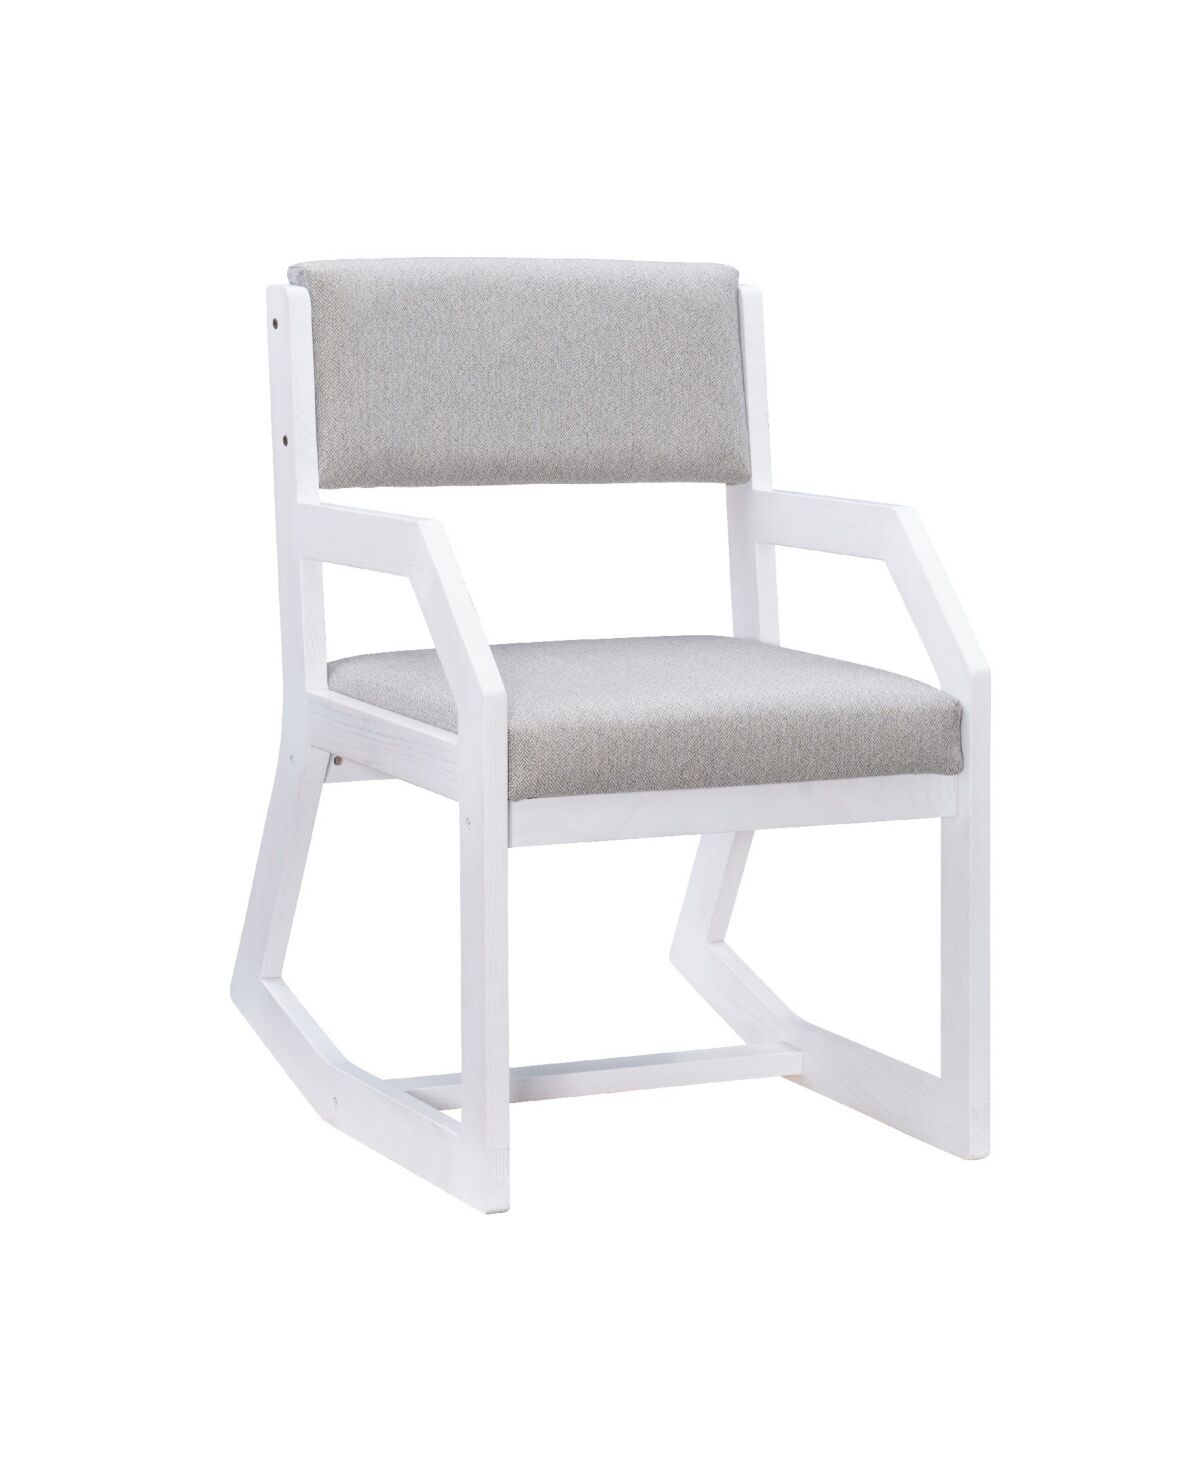 Linon Home Decor Alles 2-Position Sled Base Accent Chair - White, Light Gray